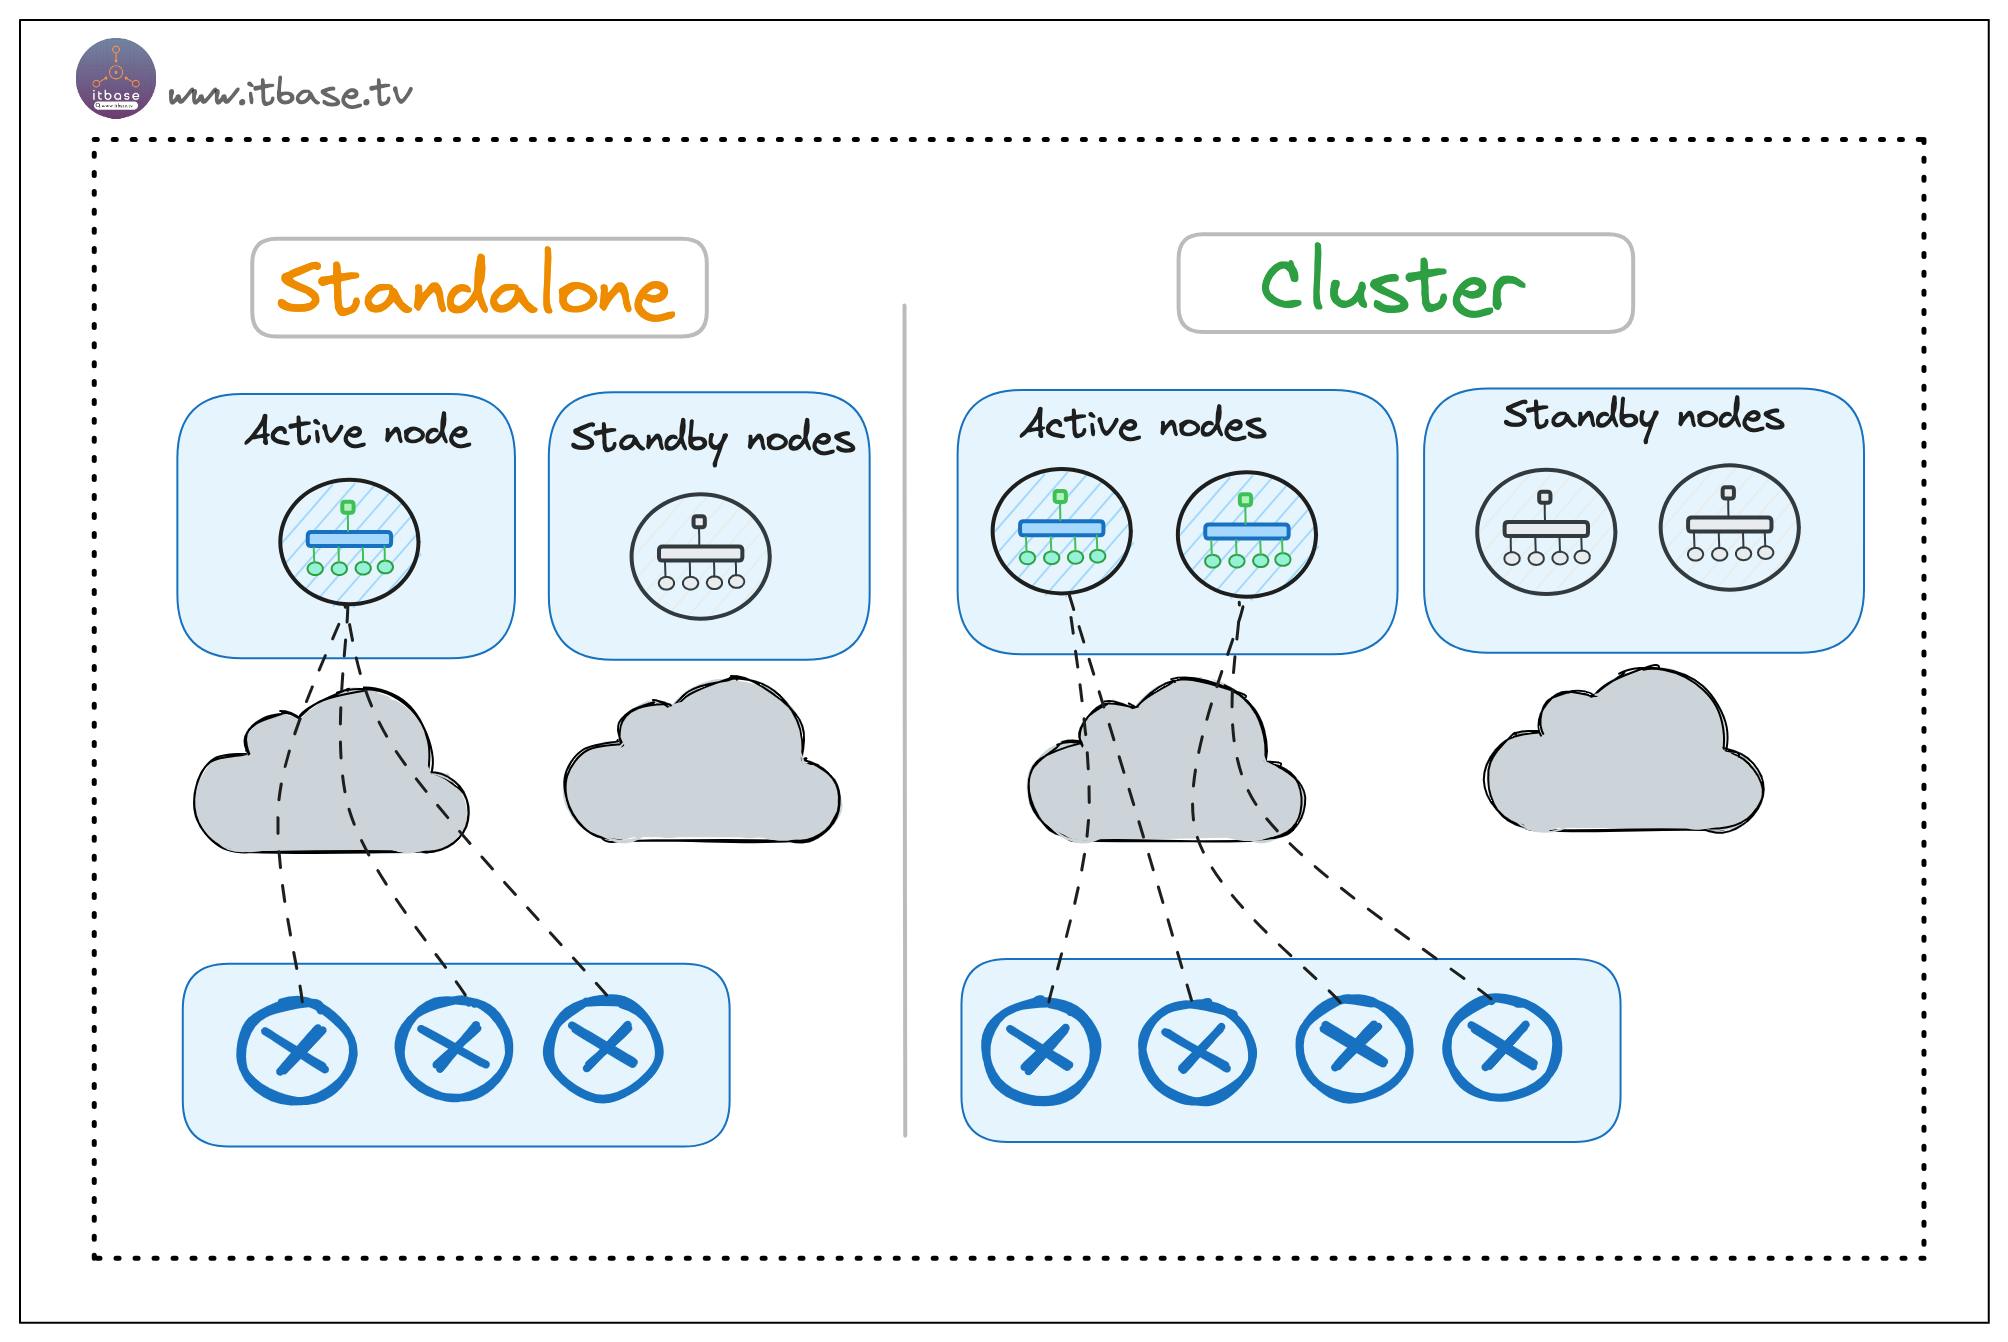 Figure 4. Cisco SDWAN vManage Cluster Overview